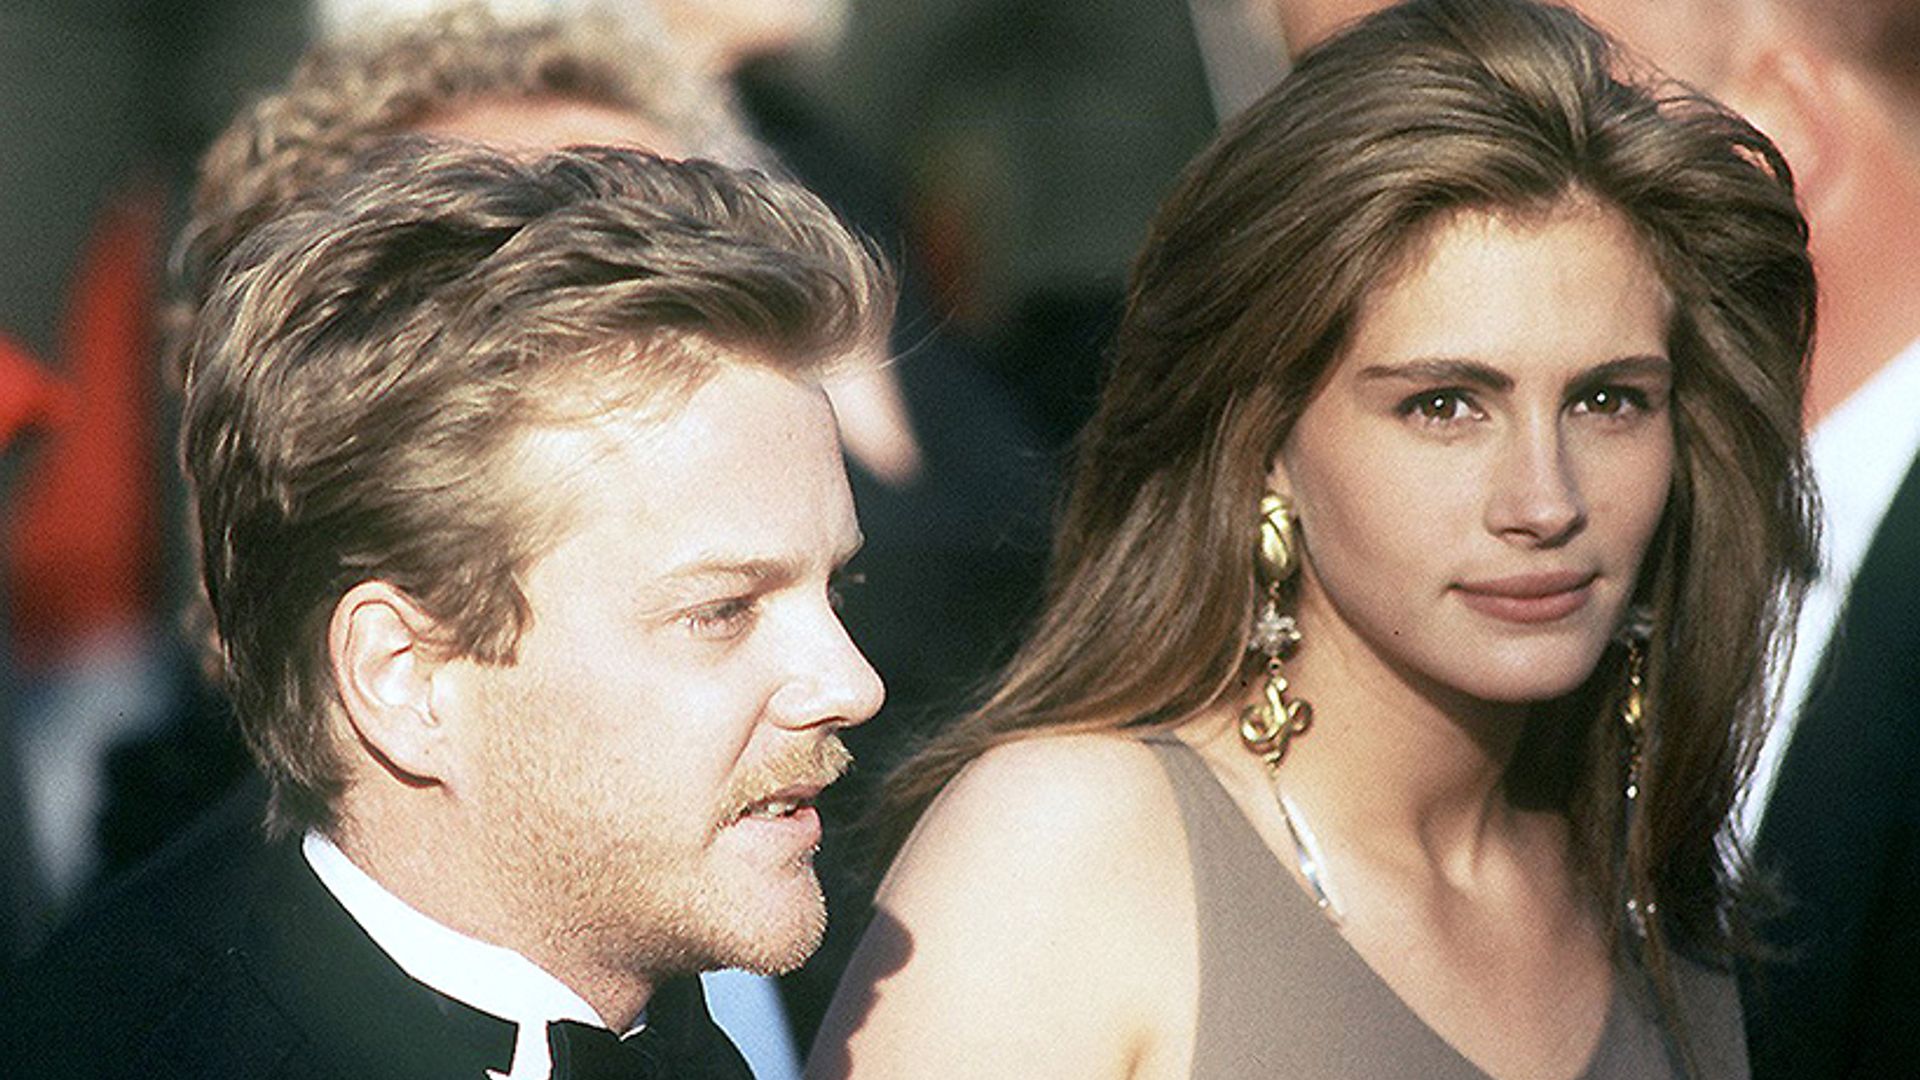 Kiefer Sutherland says Julia Roberts was 'brave' for calling off their 1991 wedding